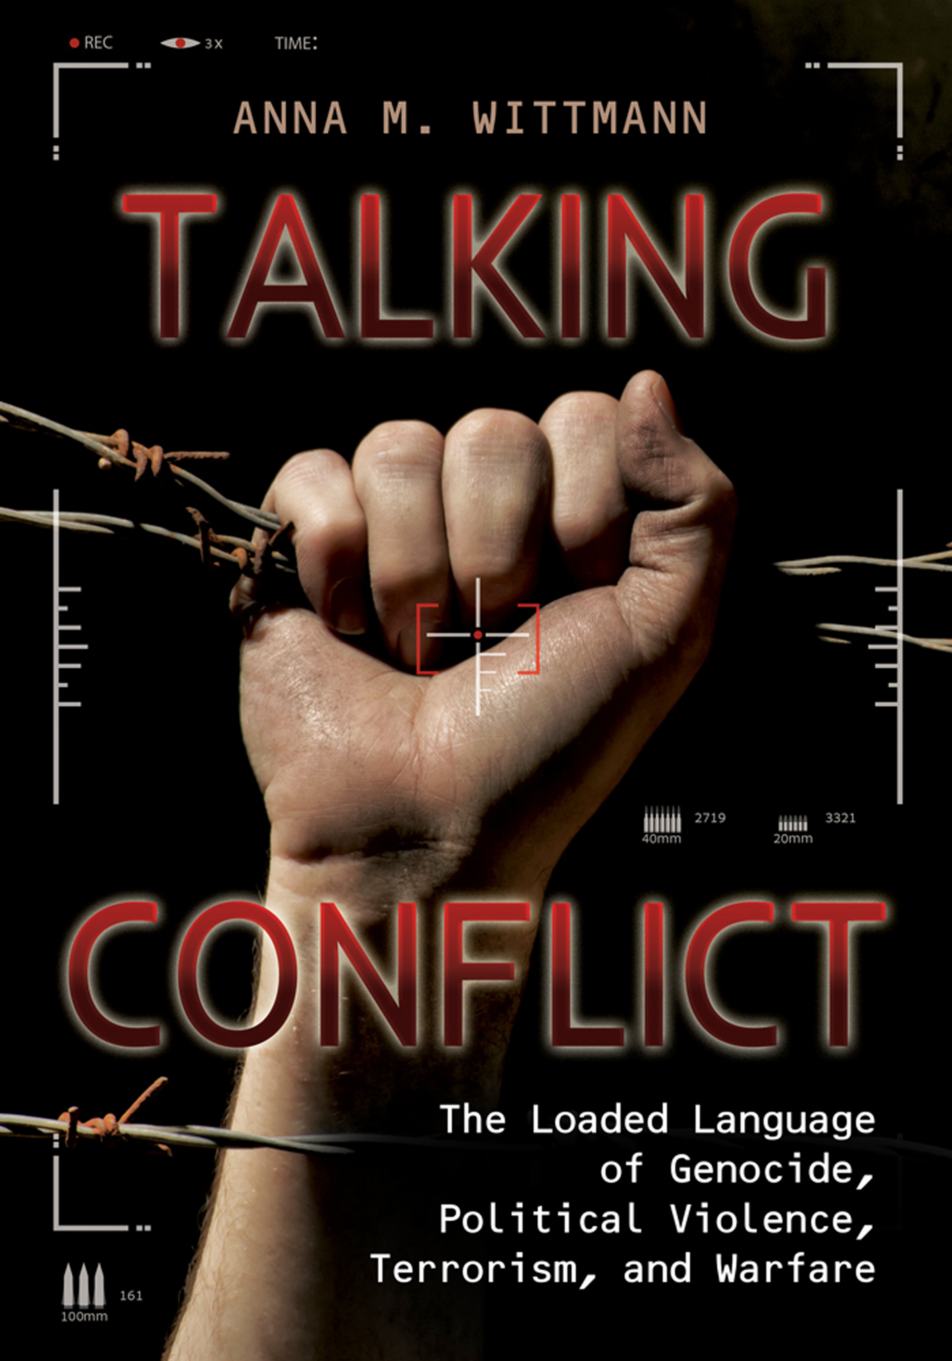 Talking Conflict: The Loaded Language of Genocide, Political Violence, Terrorism, and Warfare page Cover1